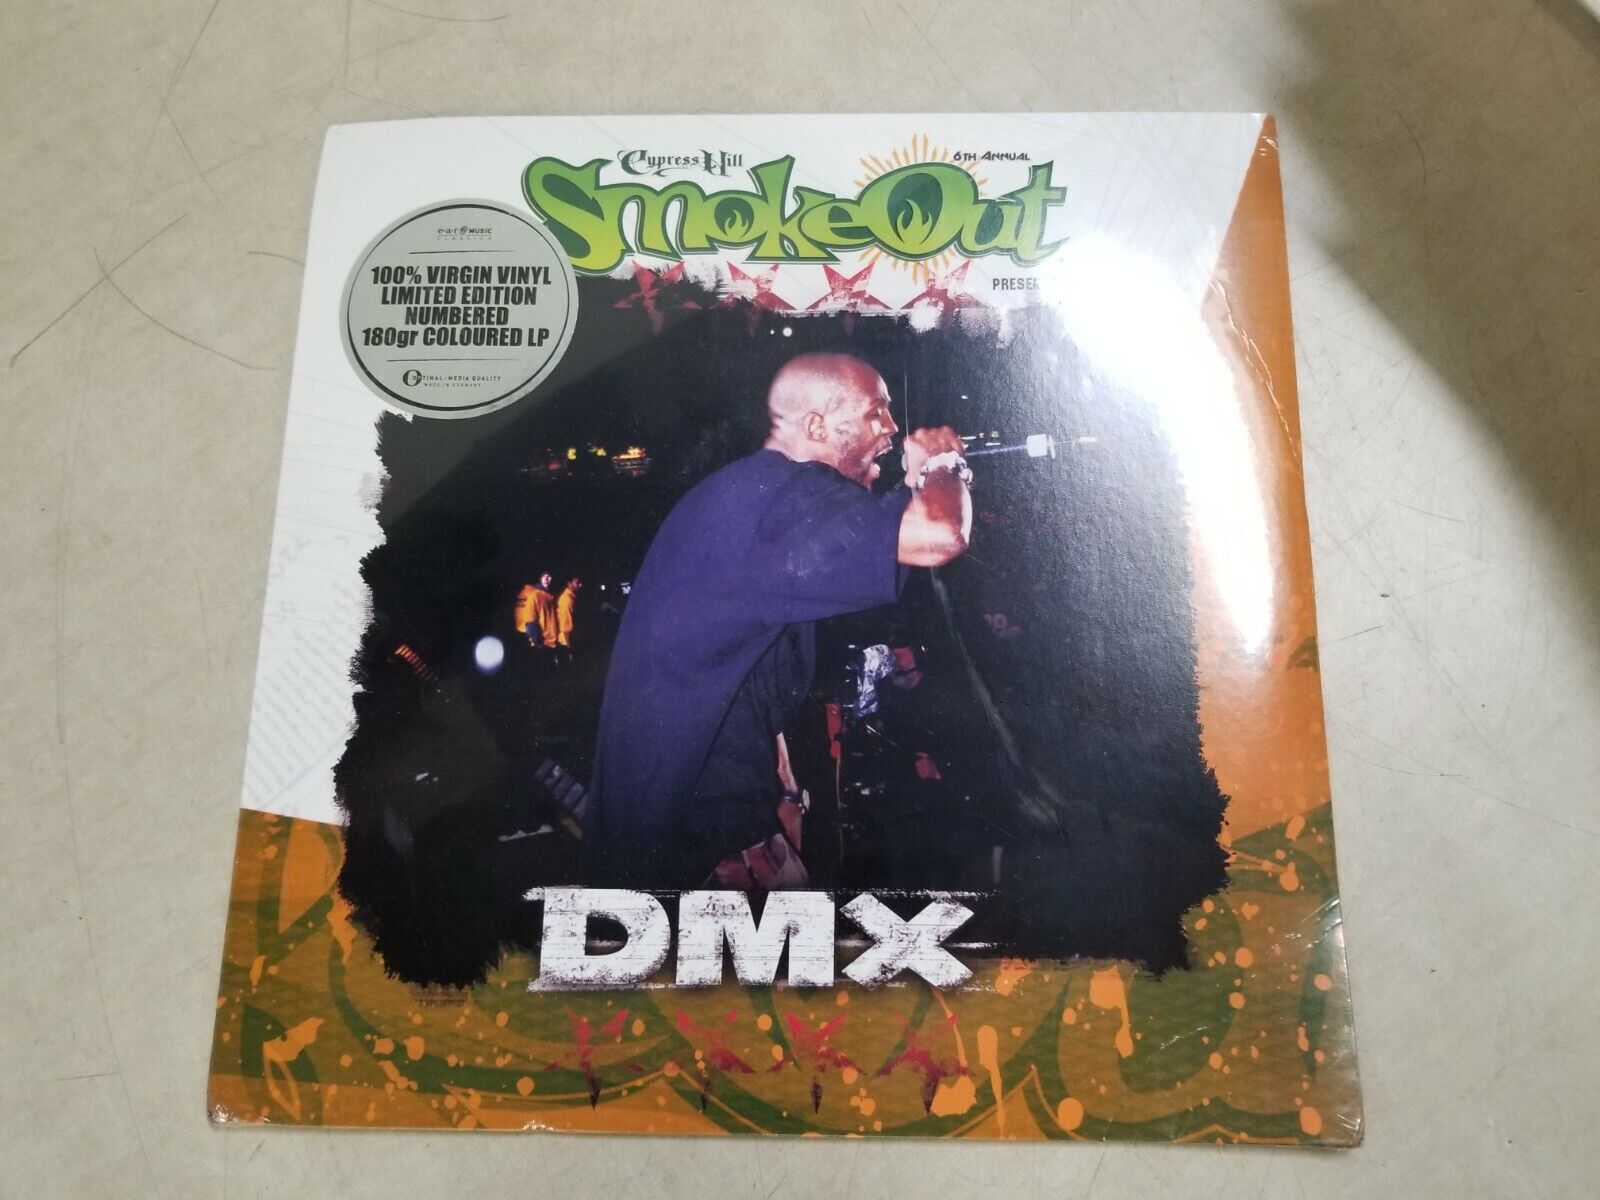 DMX - Cyprus Hill\'s The Smoke Out Festival - COLORED Vinyl LP #/3000